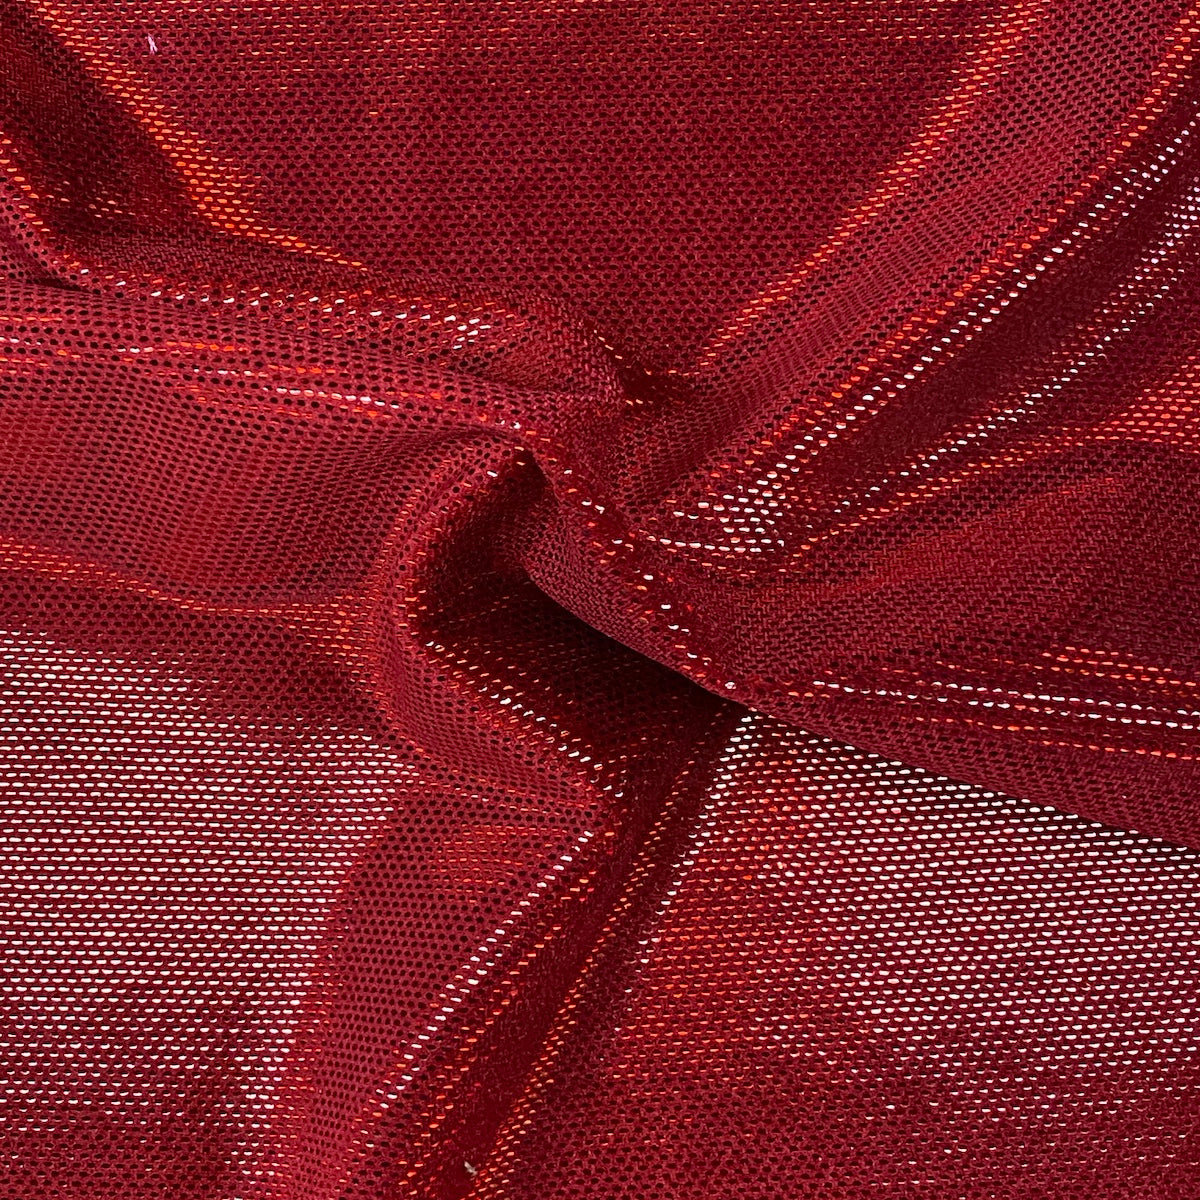 Foil Spandex Fabric Red, by the yard